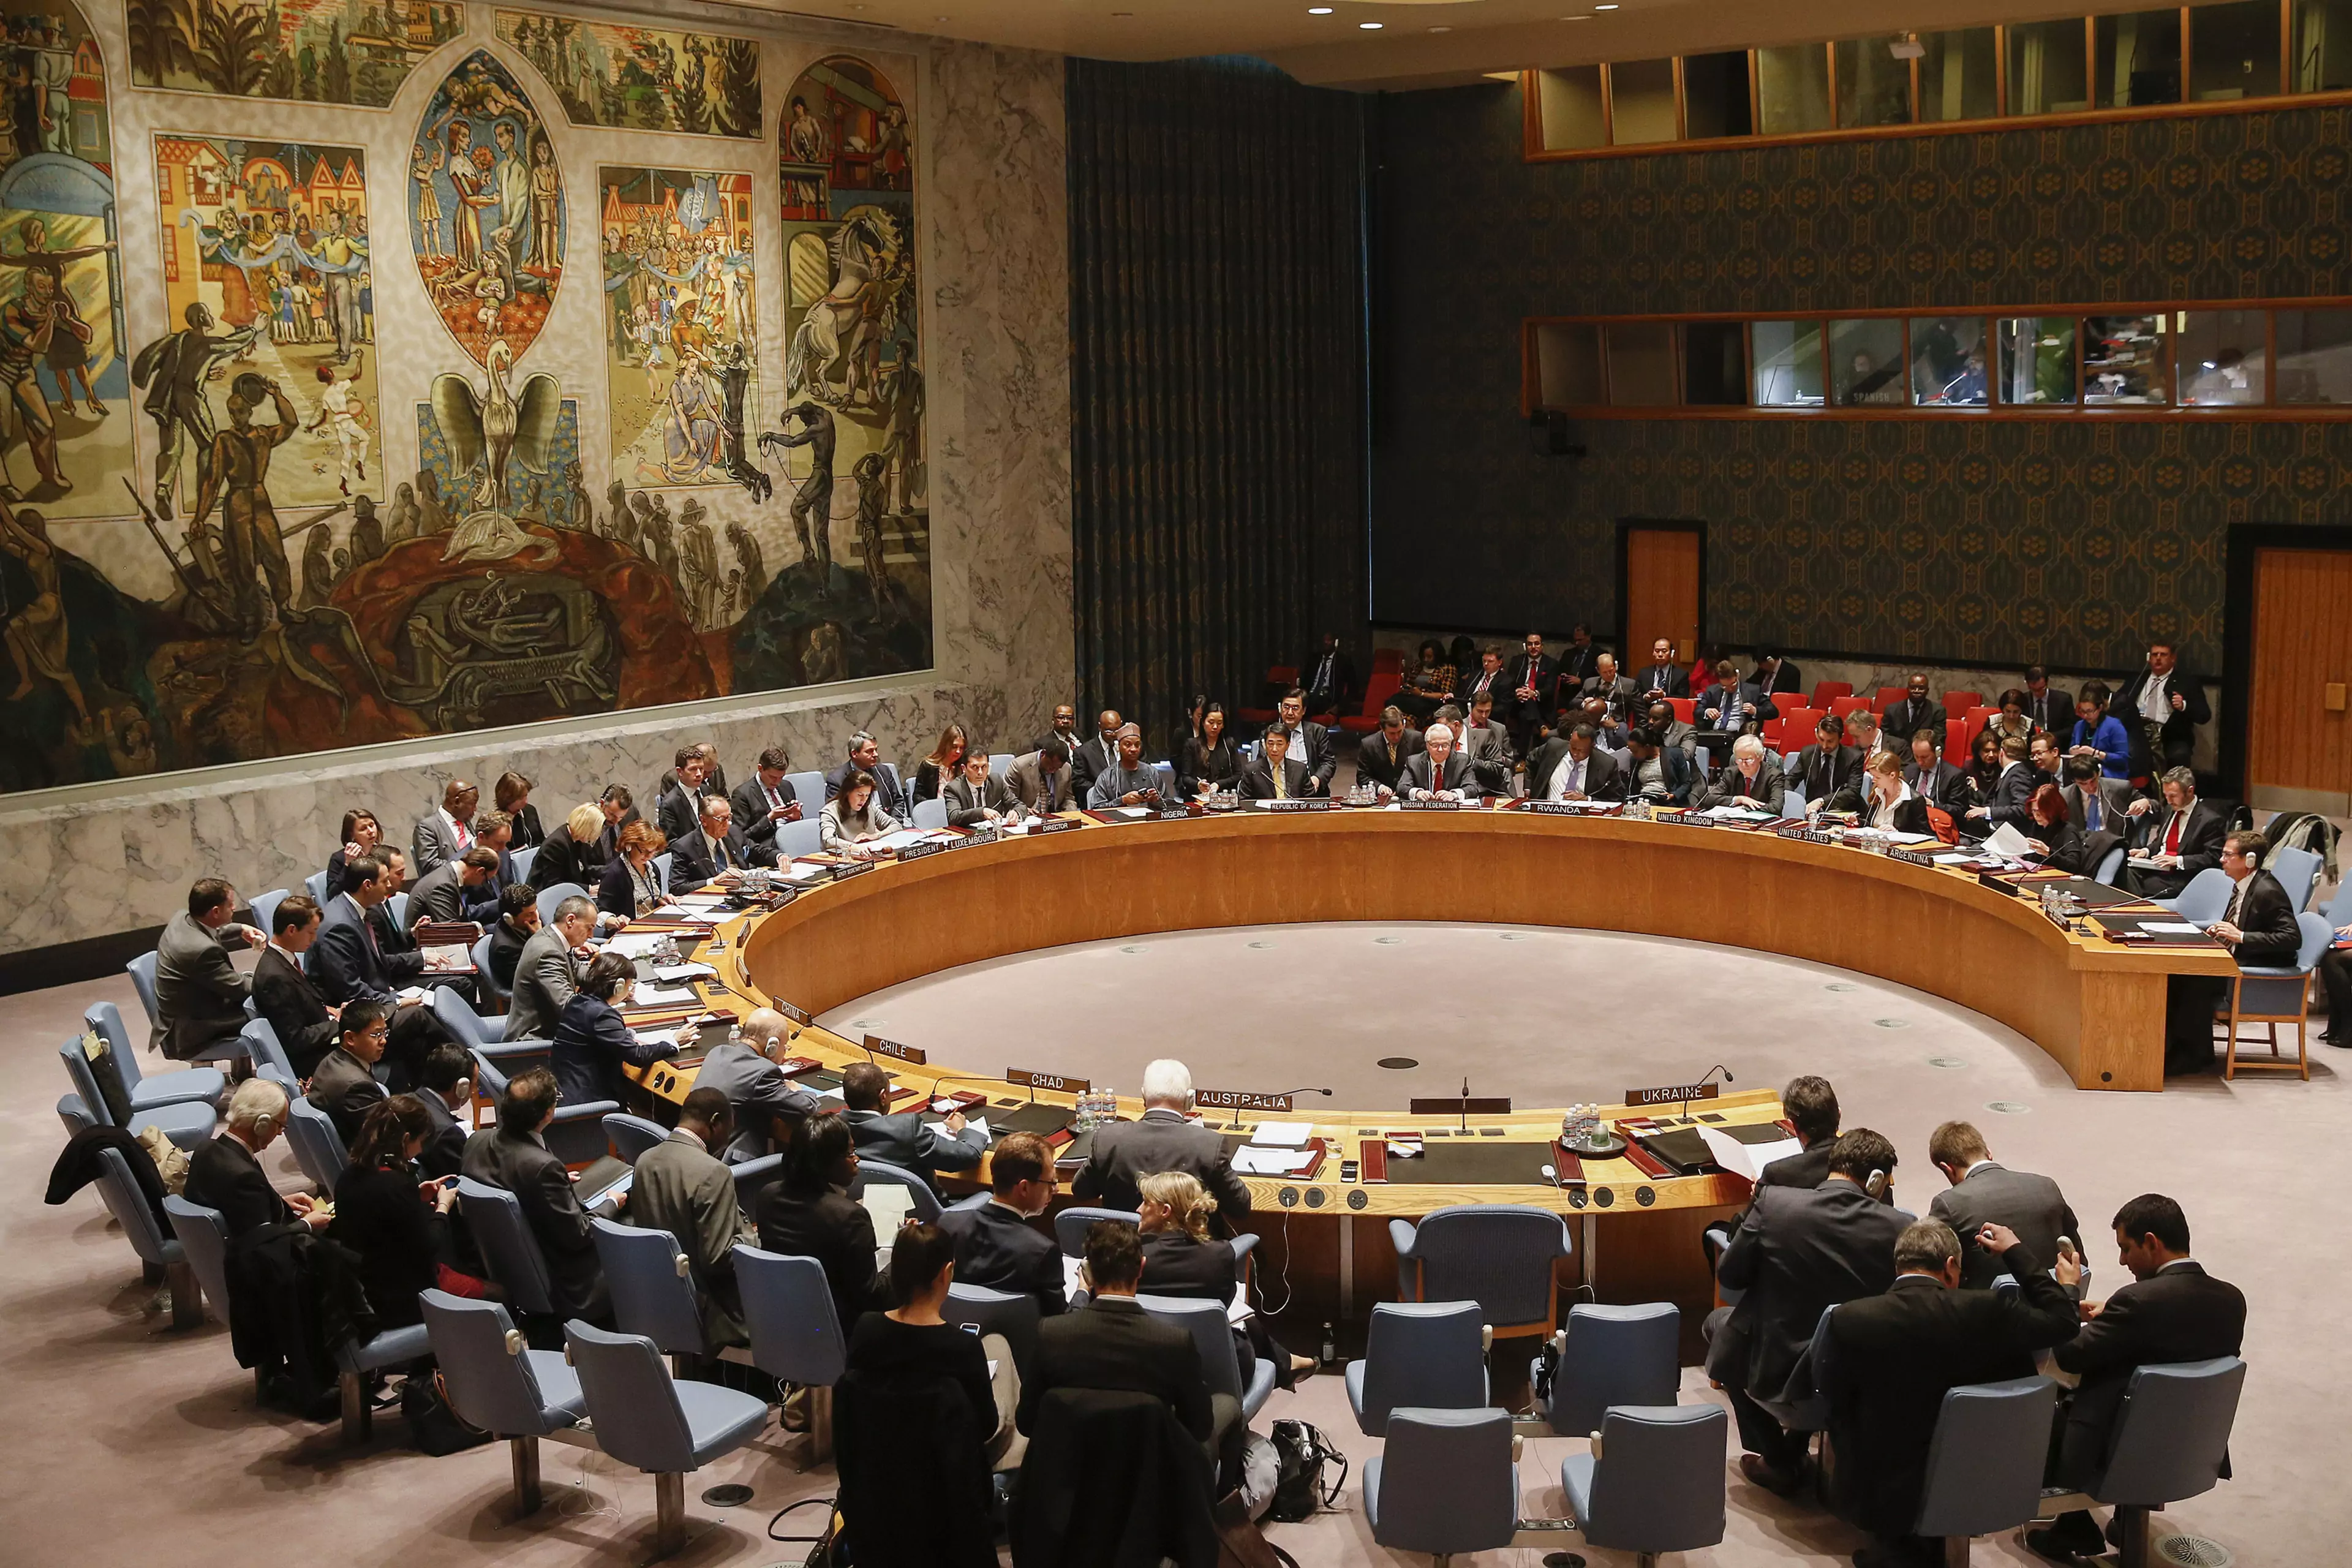 Members of the Security Council sit during a meeting at the UN headquarters in New York.